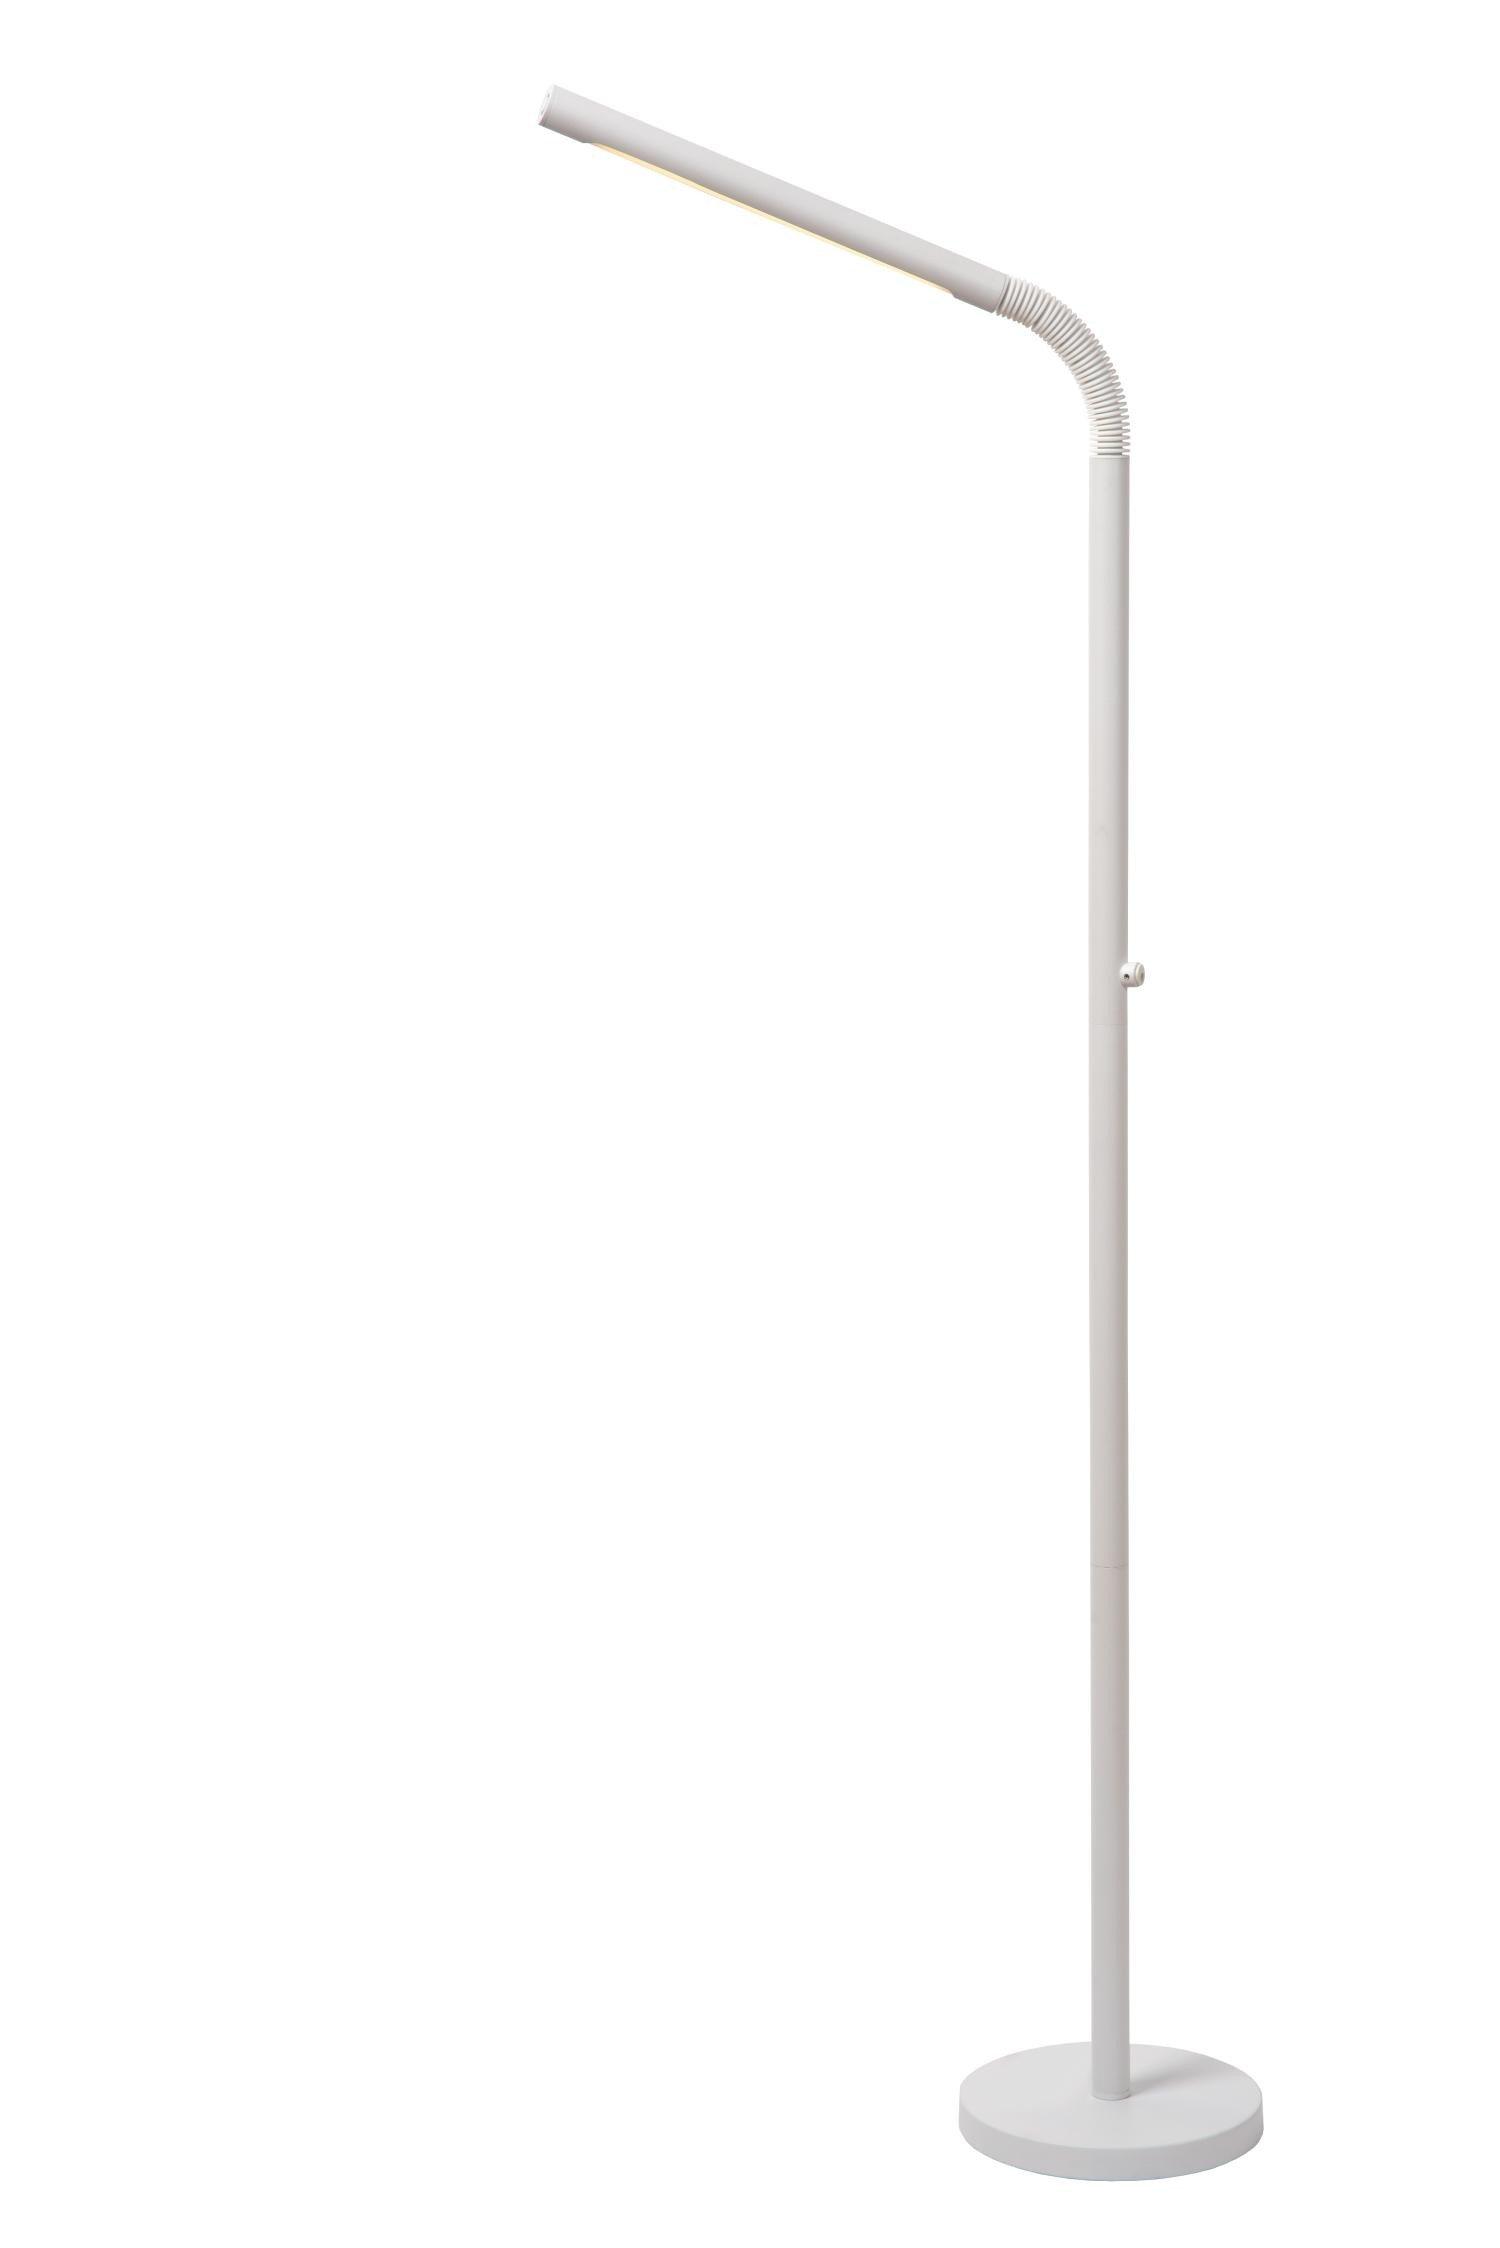 Lucide Gilly Classic Floor Reading Lamp LED Dim. 1x3W 2700K White